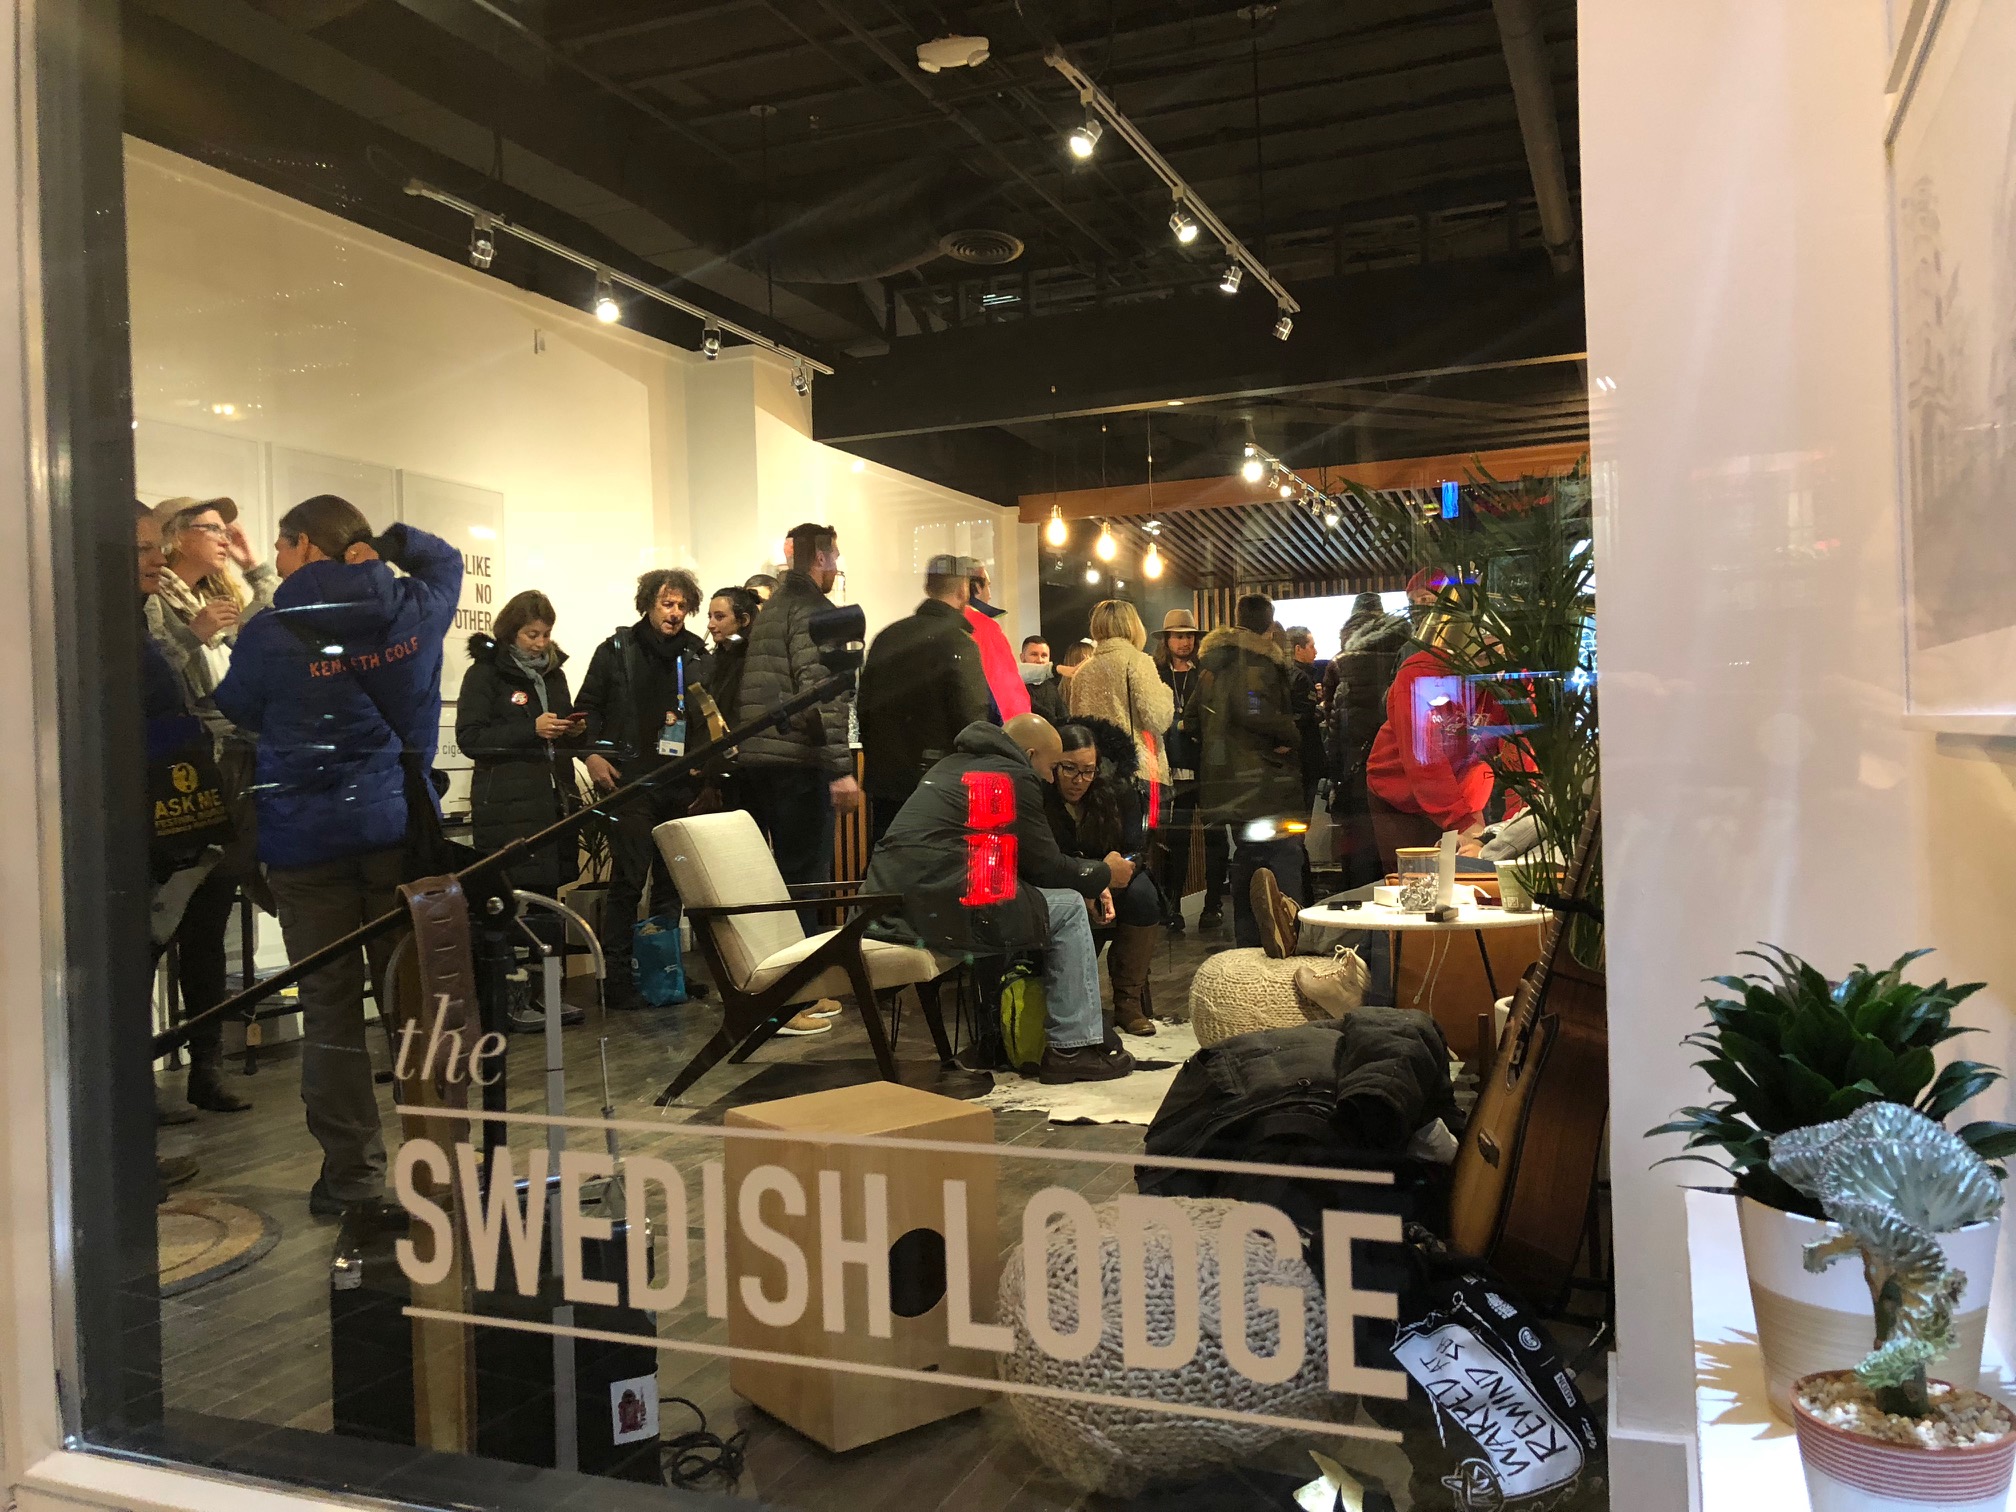 People mingling with each other in Swedish Lodge